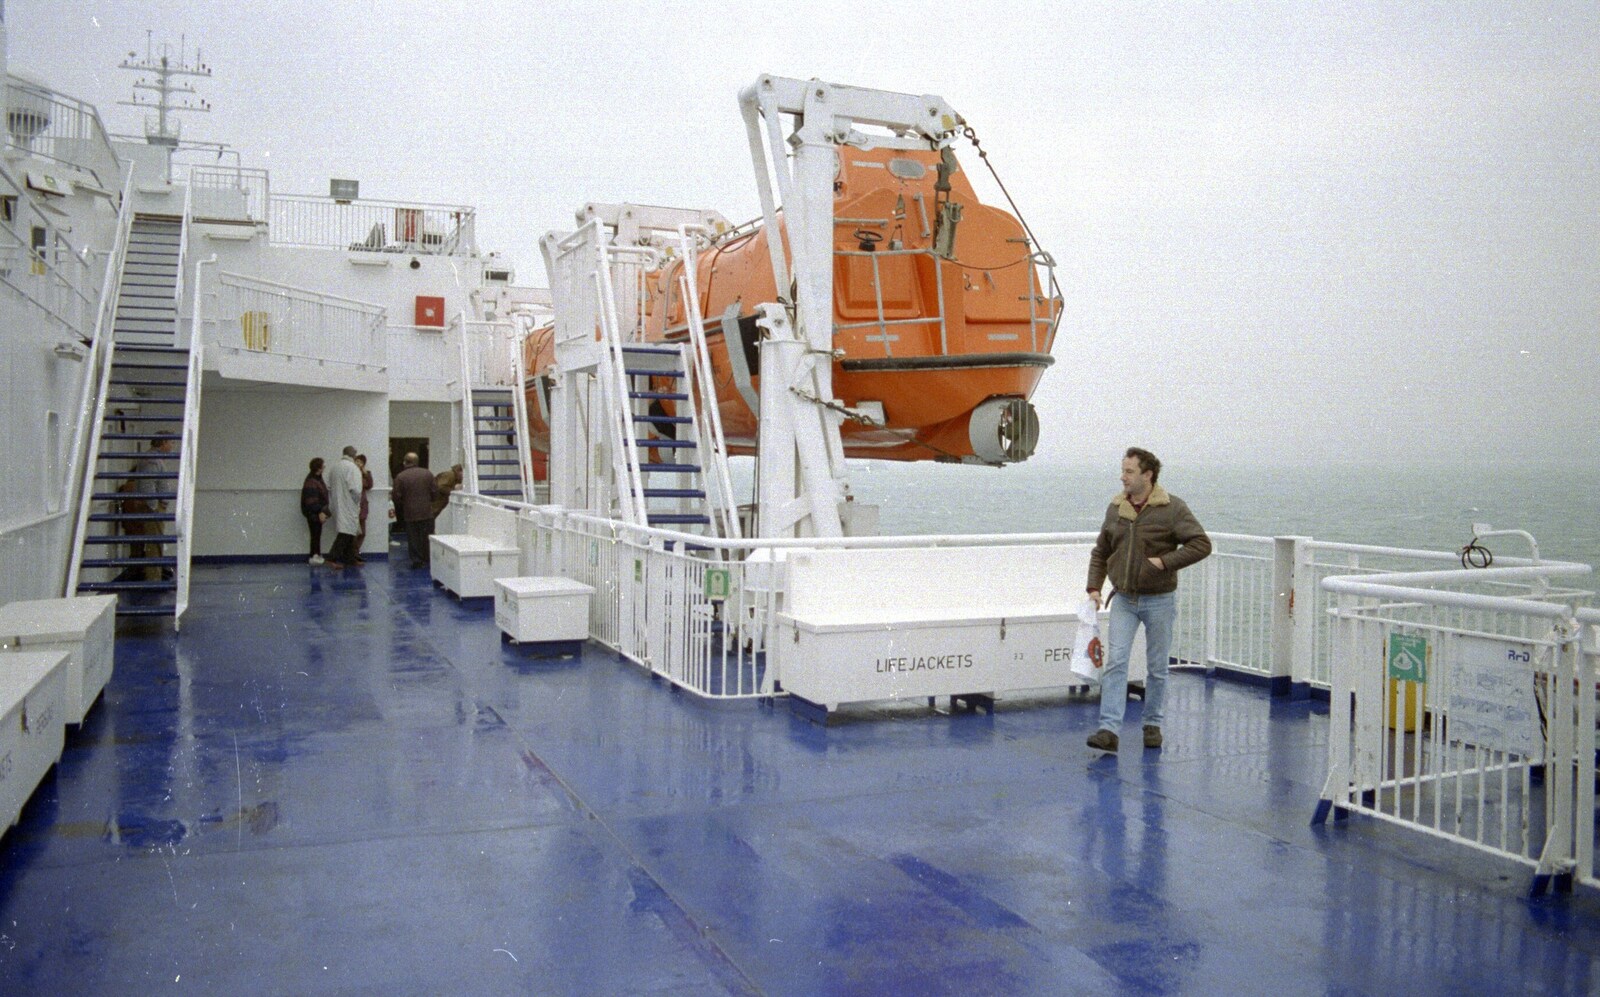 DH roams the damp deck of a channel ferry from The CISU Internet Team, Bedroom Building and Ferries, Suffolk - 16th February 1996